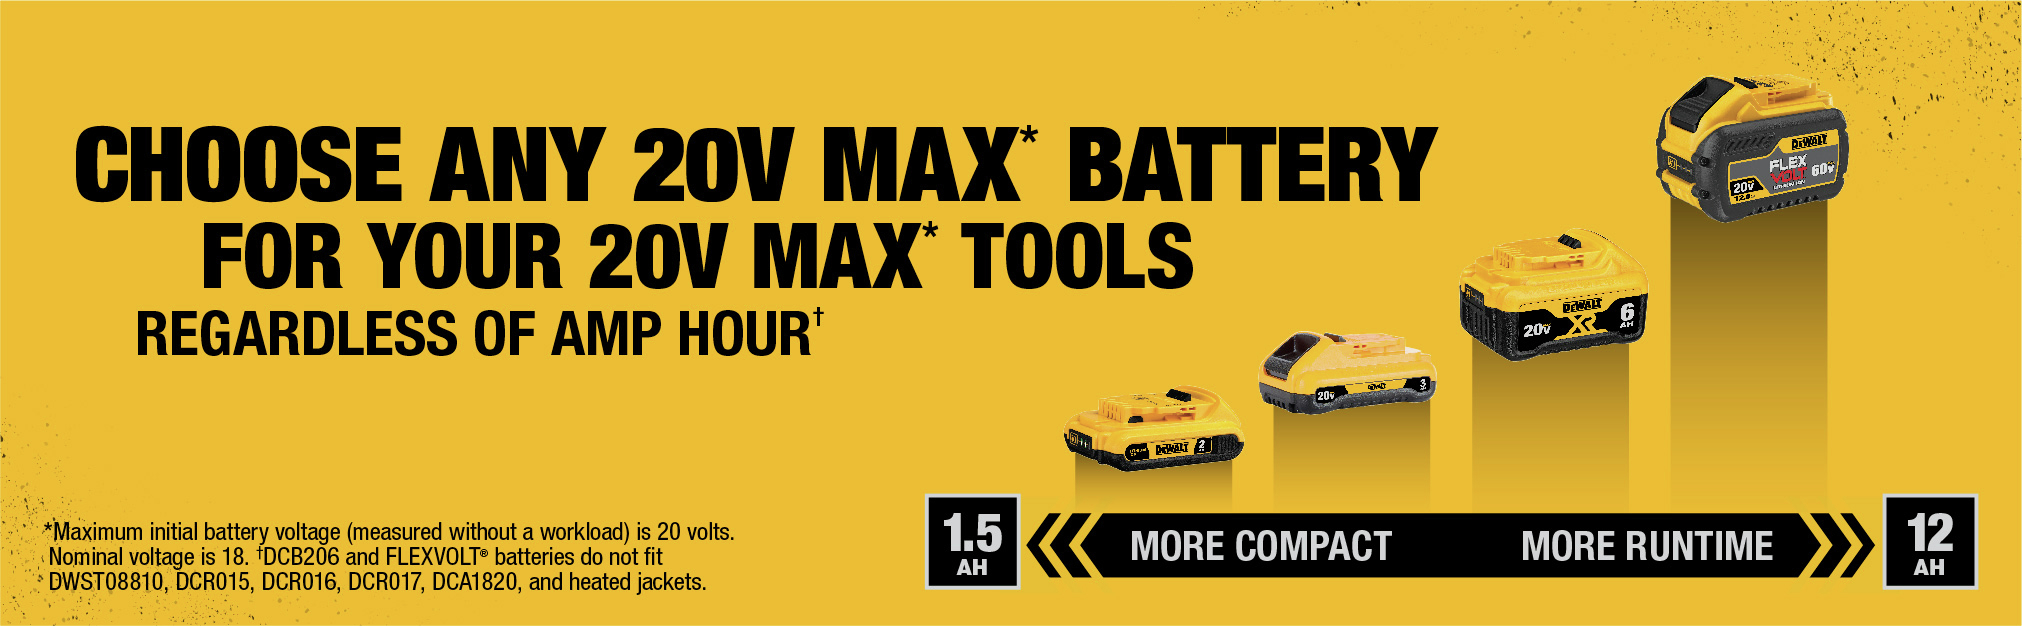 Choose Any 20V MAX Battery for your 20V MAX Tools